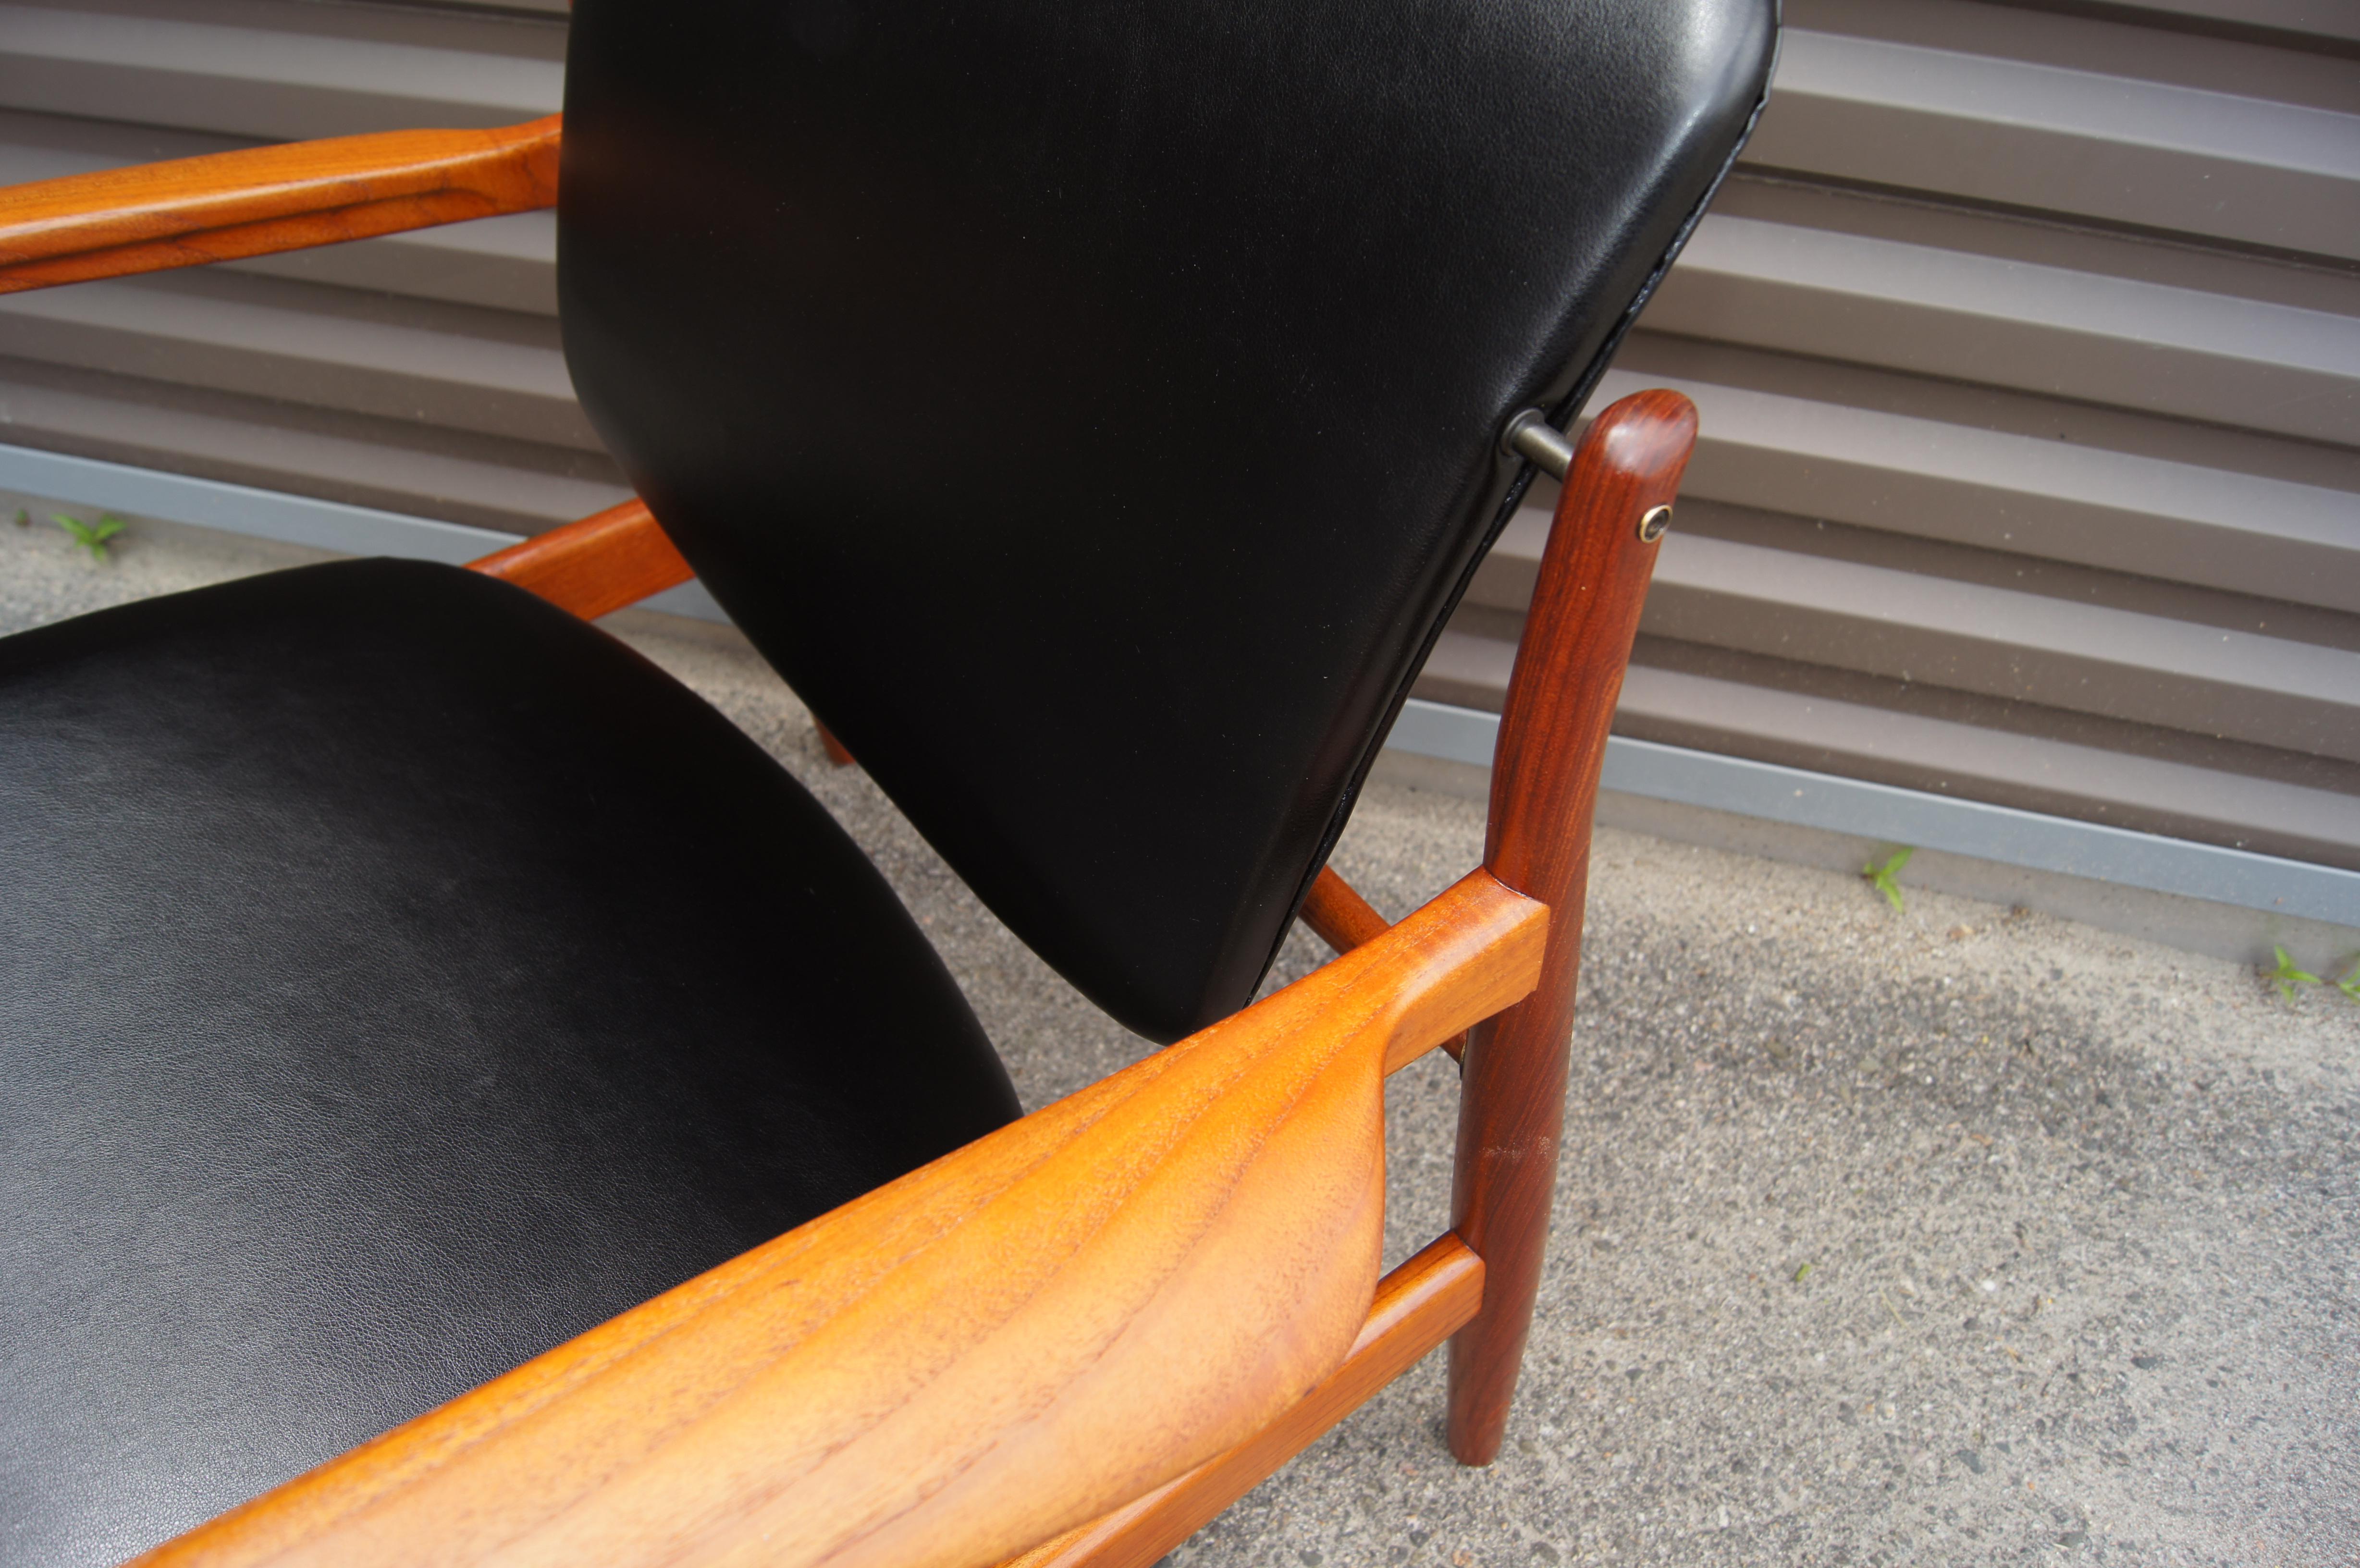 Teak & Leather Lounge Chair, Model FD136, by Finn Juhl for France & Daverkosen In Good Condition For Sale In Dorchester, MA